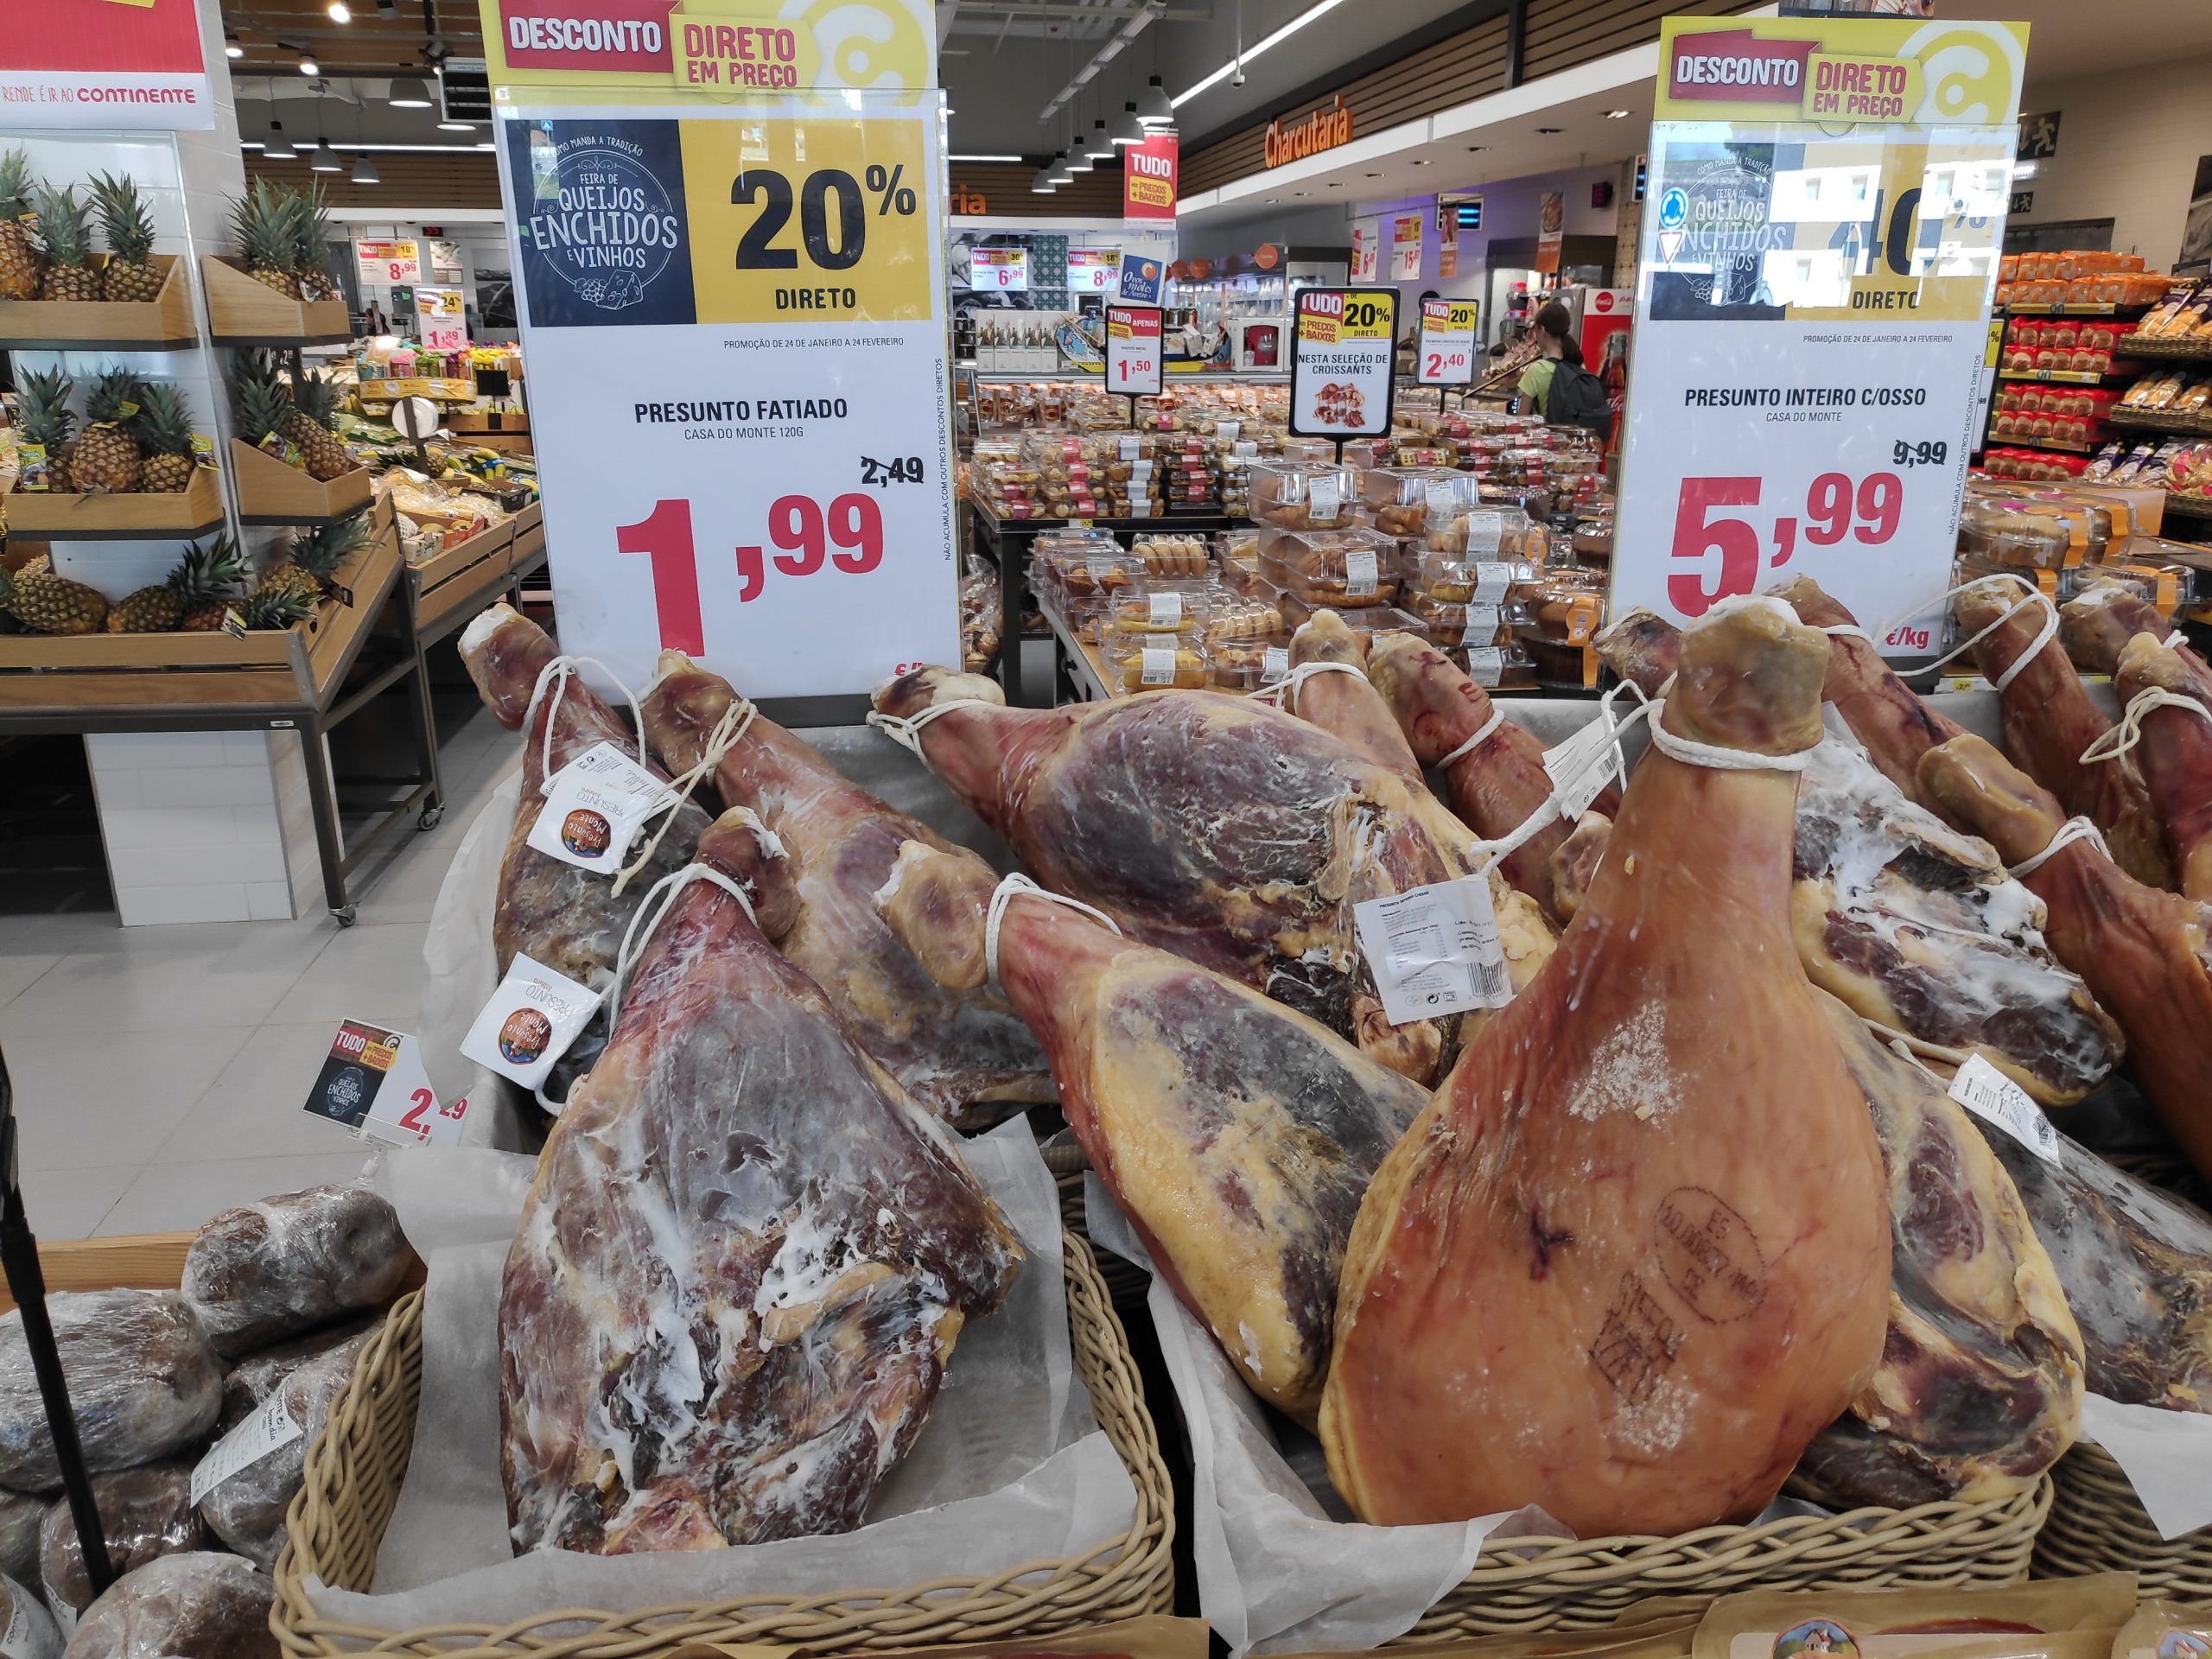 Just across the street of the albergue there was a big supermarket. We still don't know how this was so cheap. It's usually at least 20€ / kg for the worst quality here in Slovenia. Not to mention Iberian prosciutto, which goes for over 100€  / kg